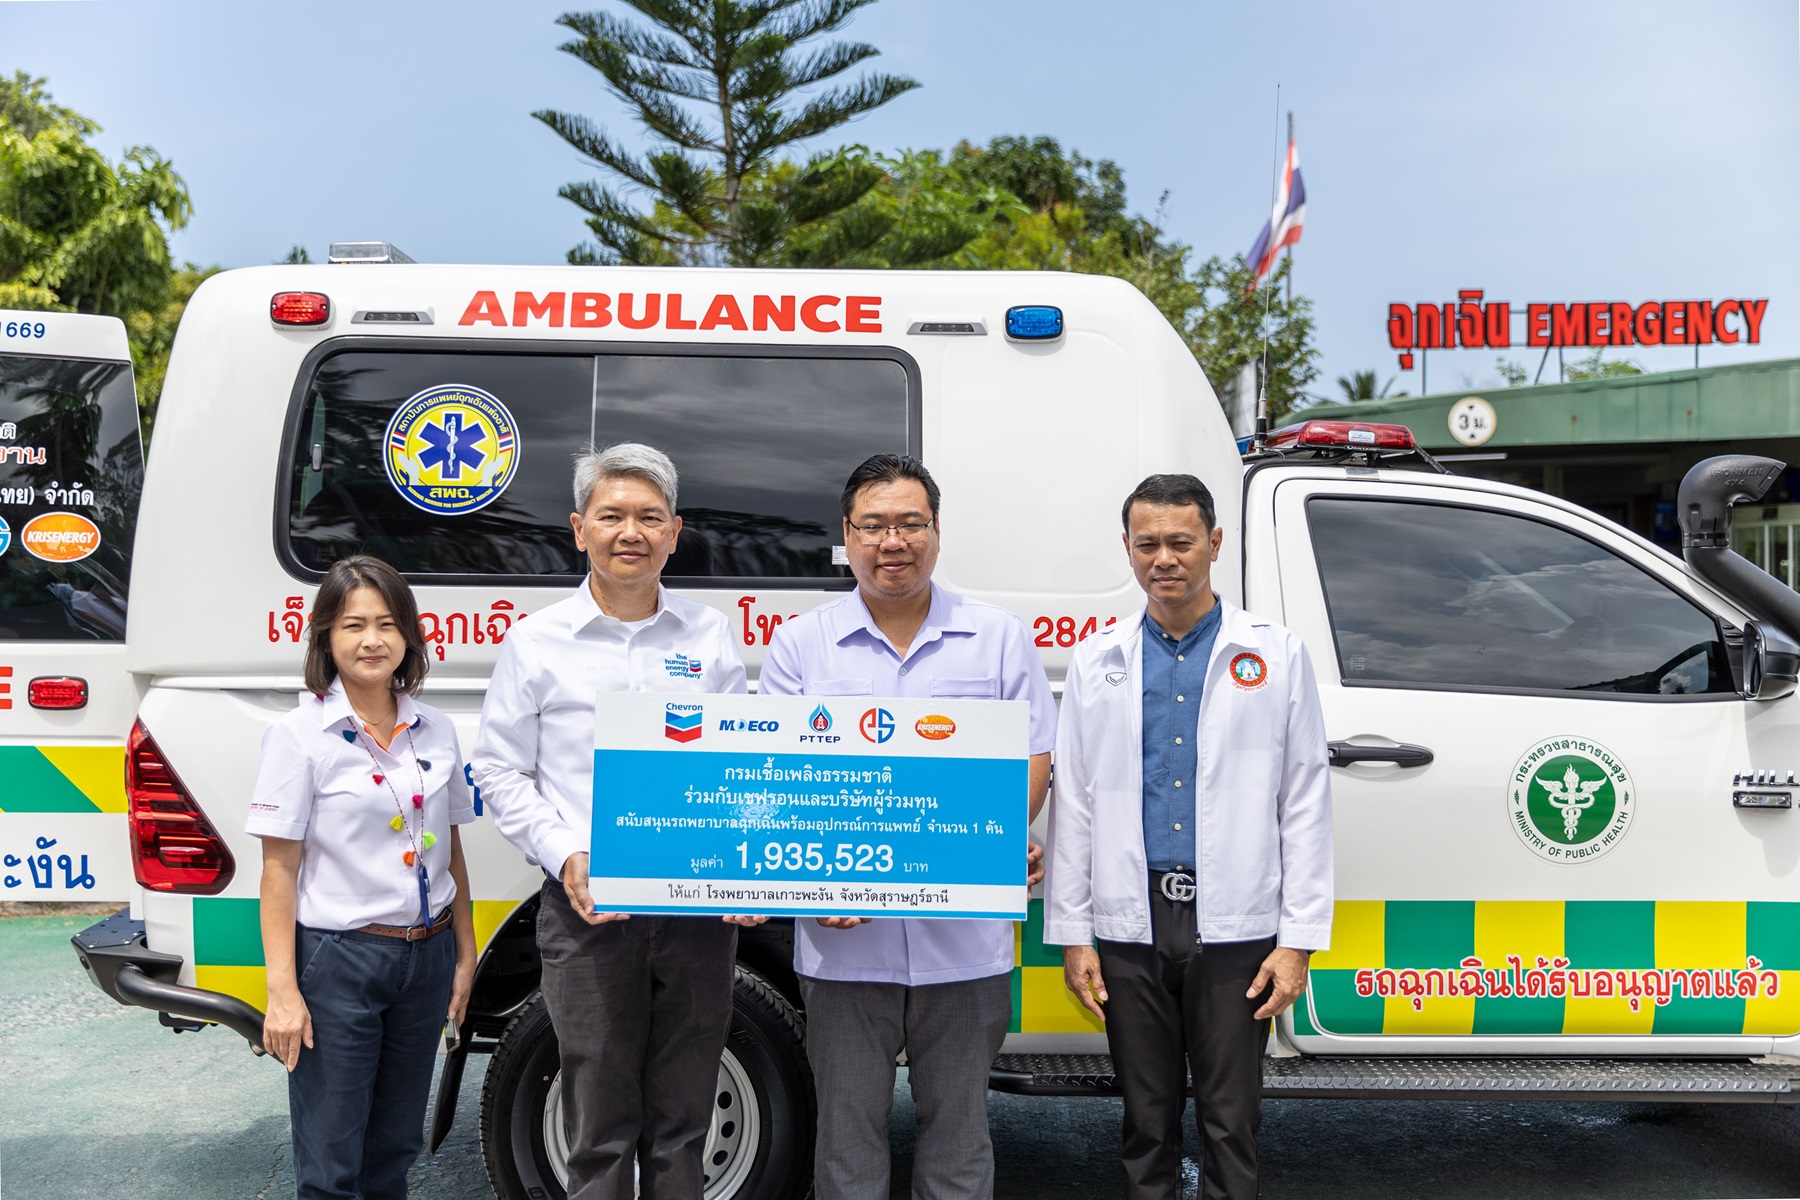 DMF in collaboration with Chevron and partners hands over an ambulance to Koh Phangan Hospital